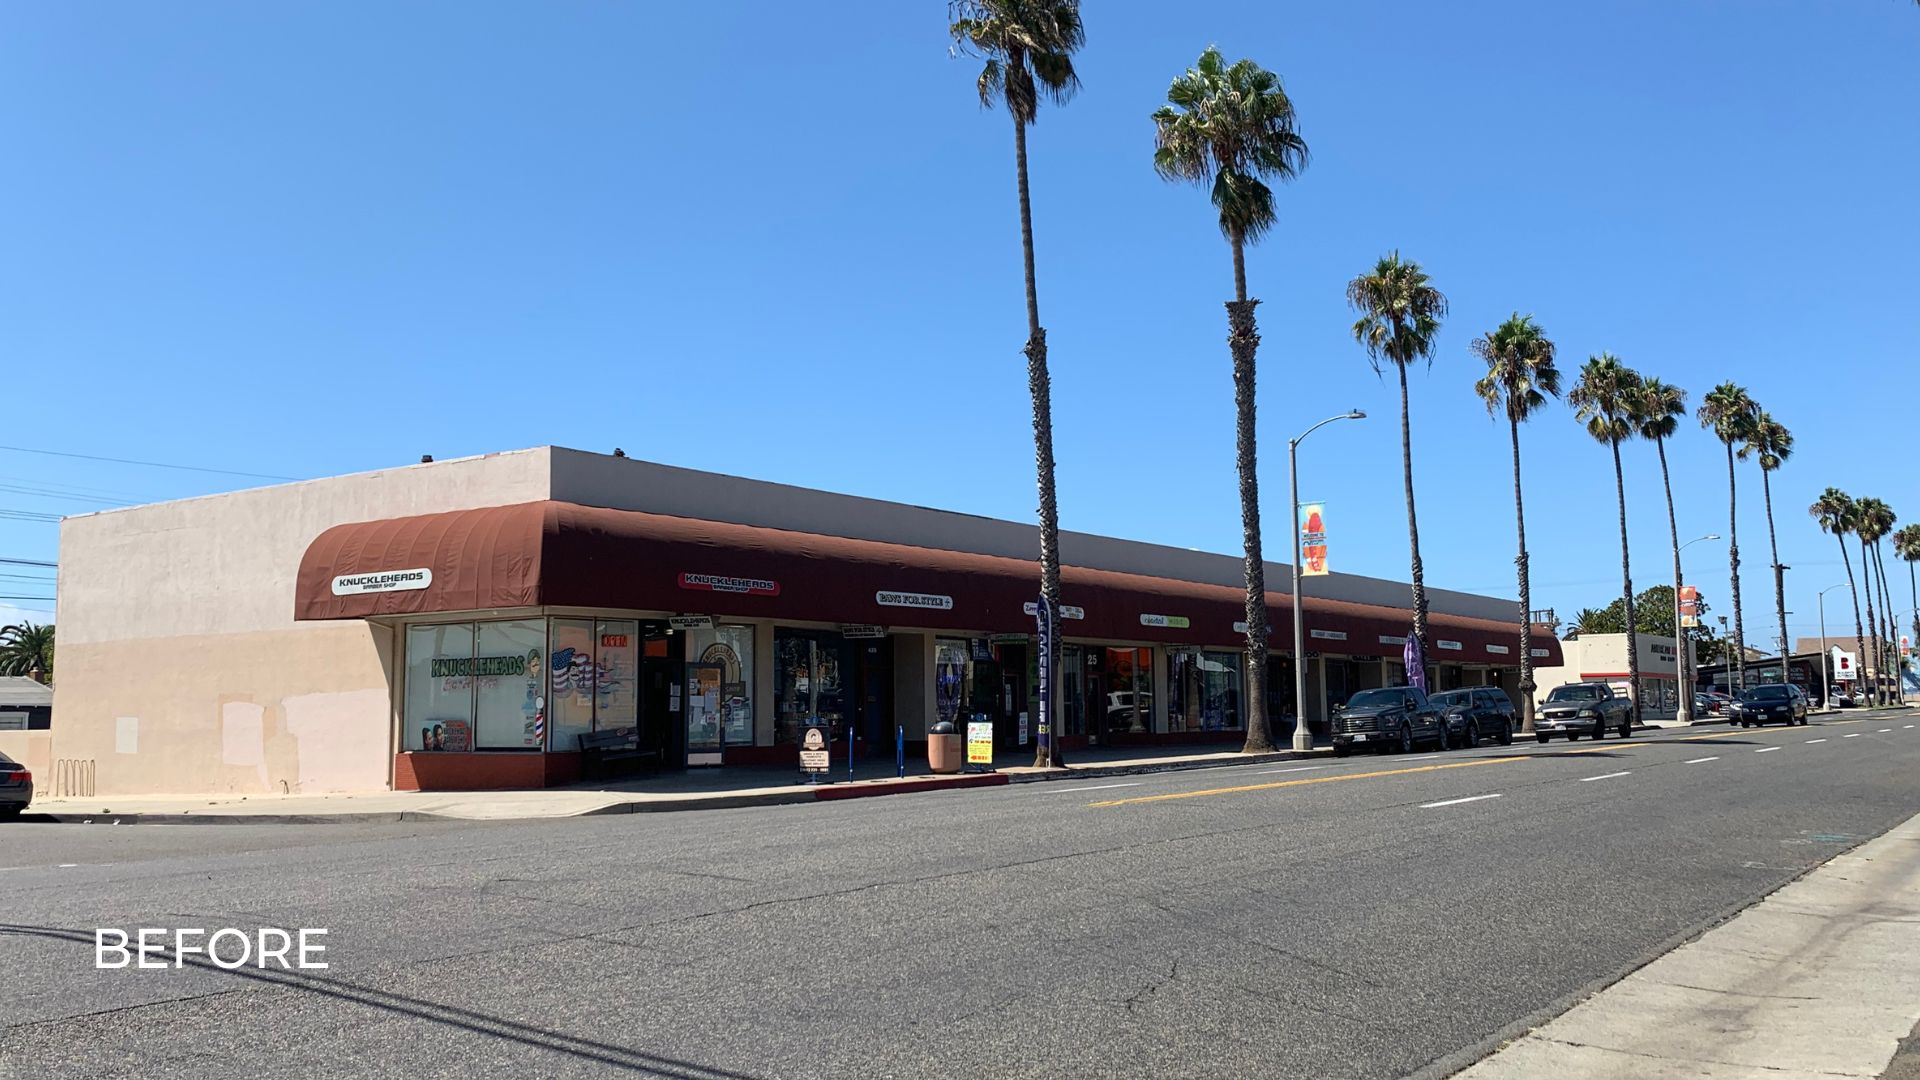 exterior building storefronts in california, plants